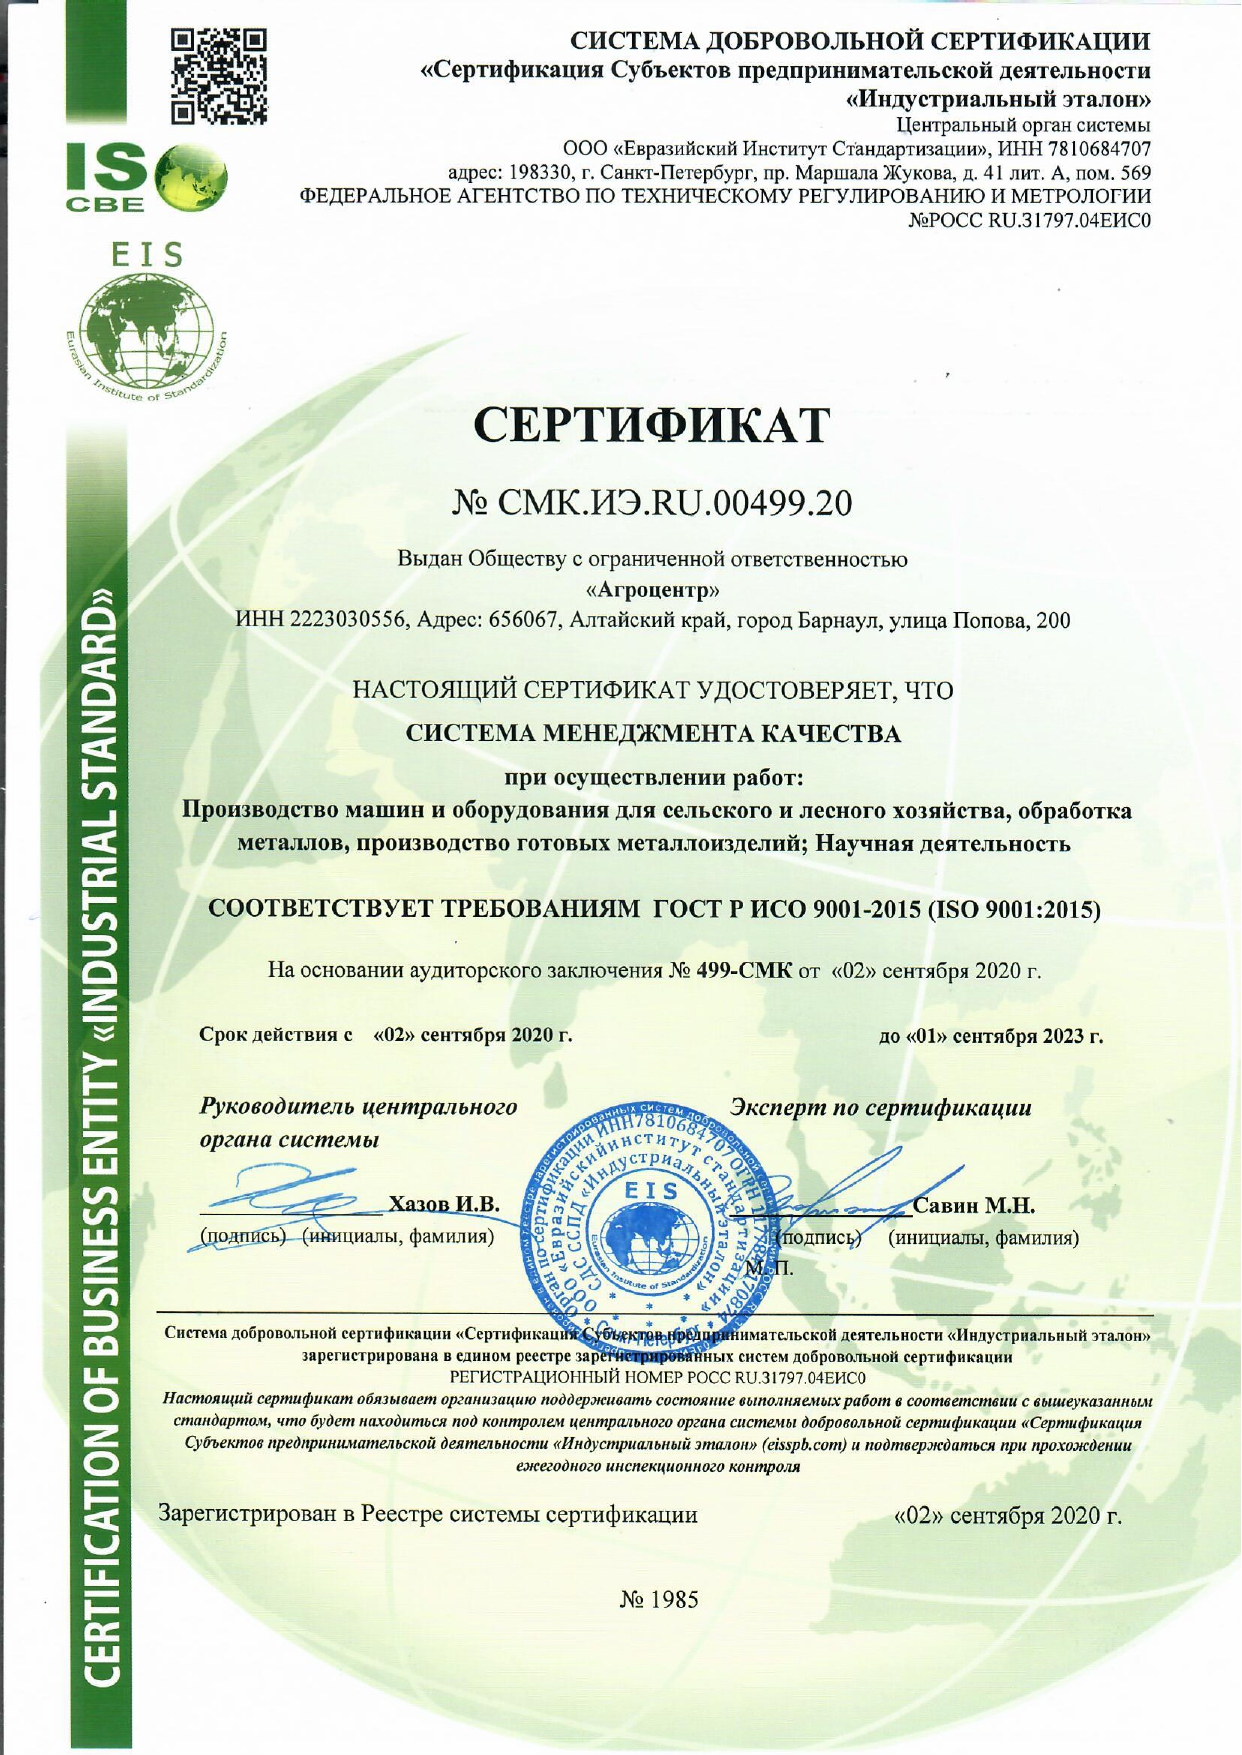 FEATAGRO Machinery Meets the Requirements of GOST R ISO 9001-2015